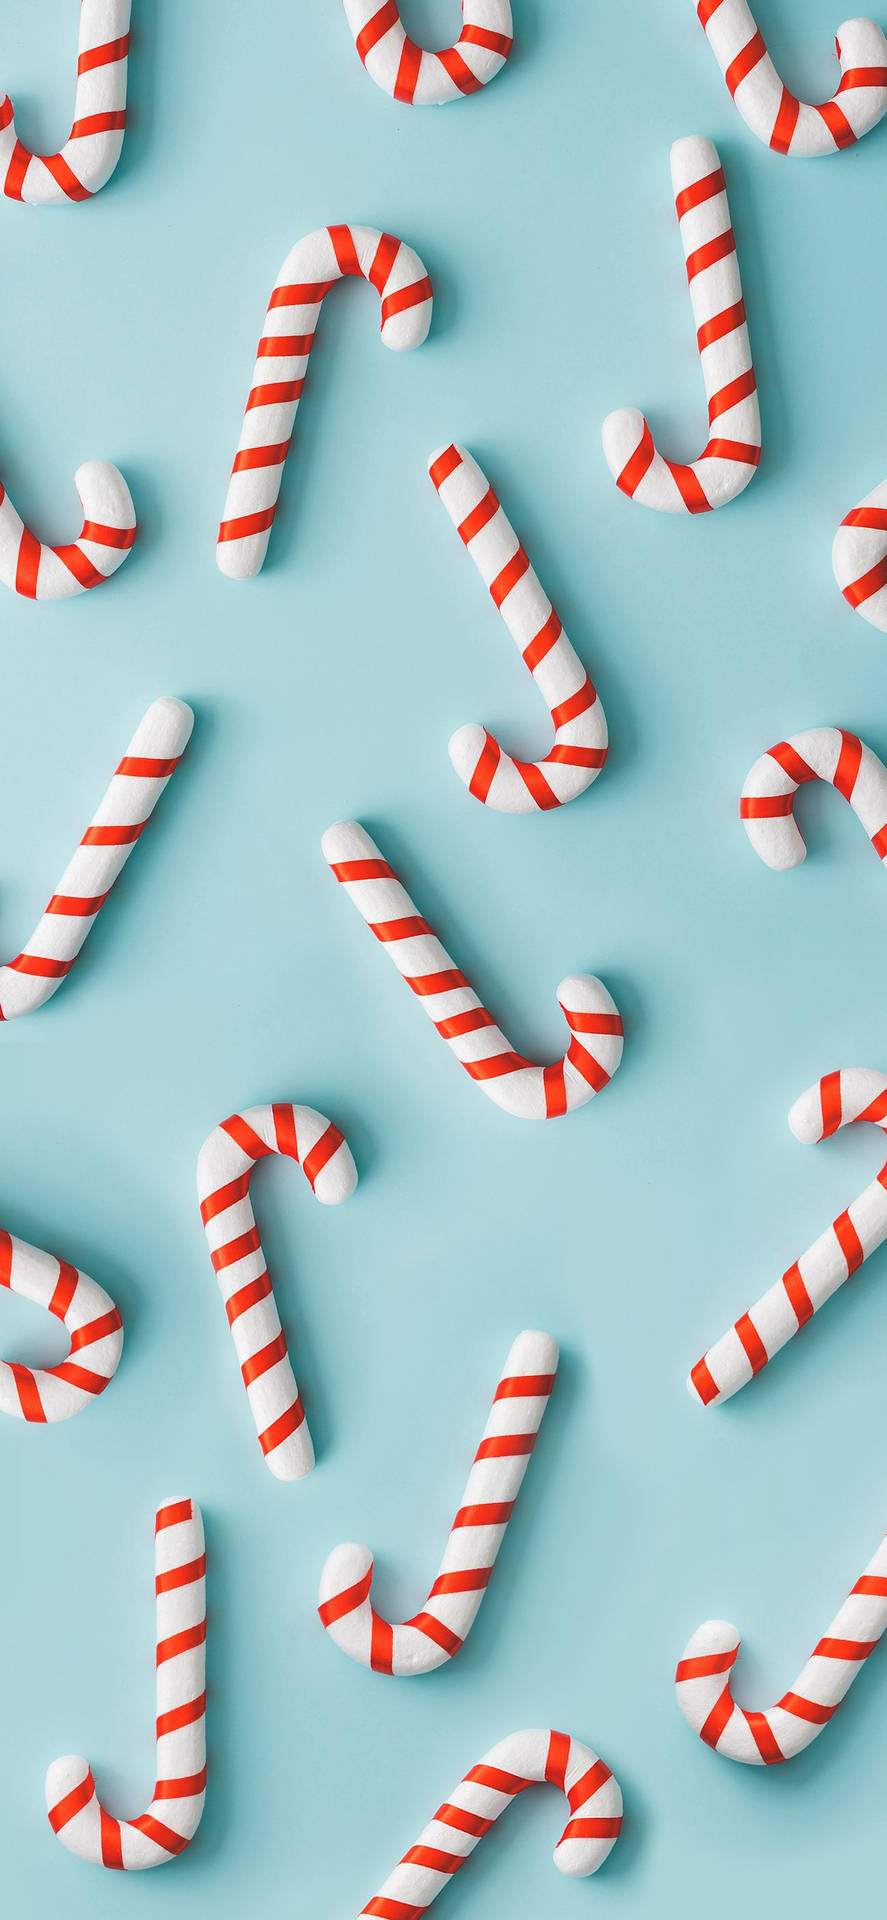 Candy Cane Pastel Shade Wallpaper